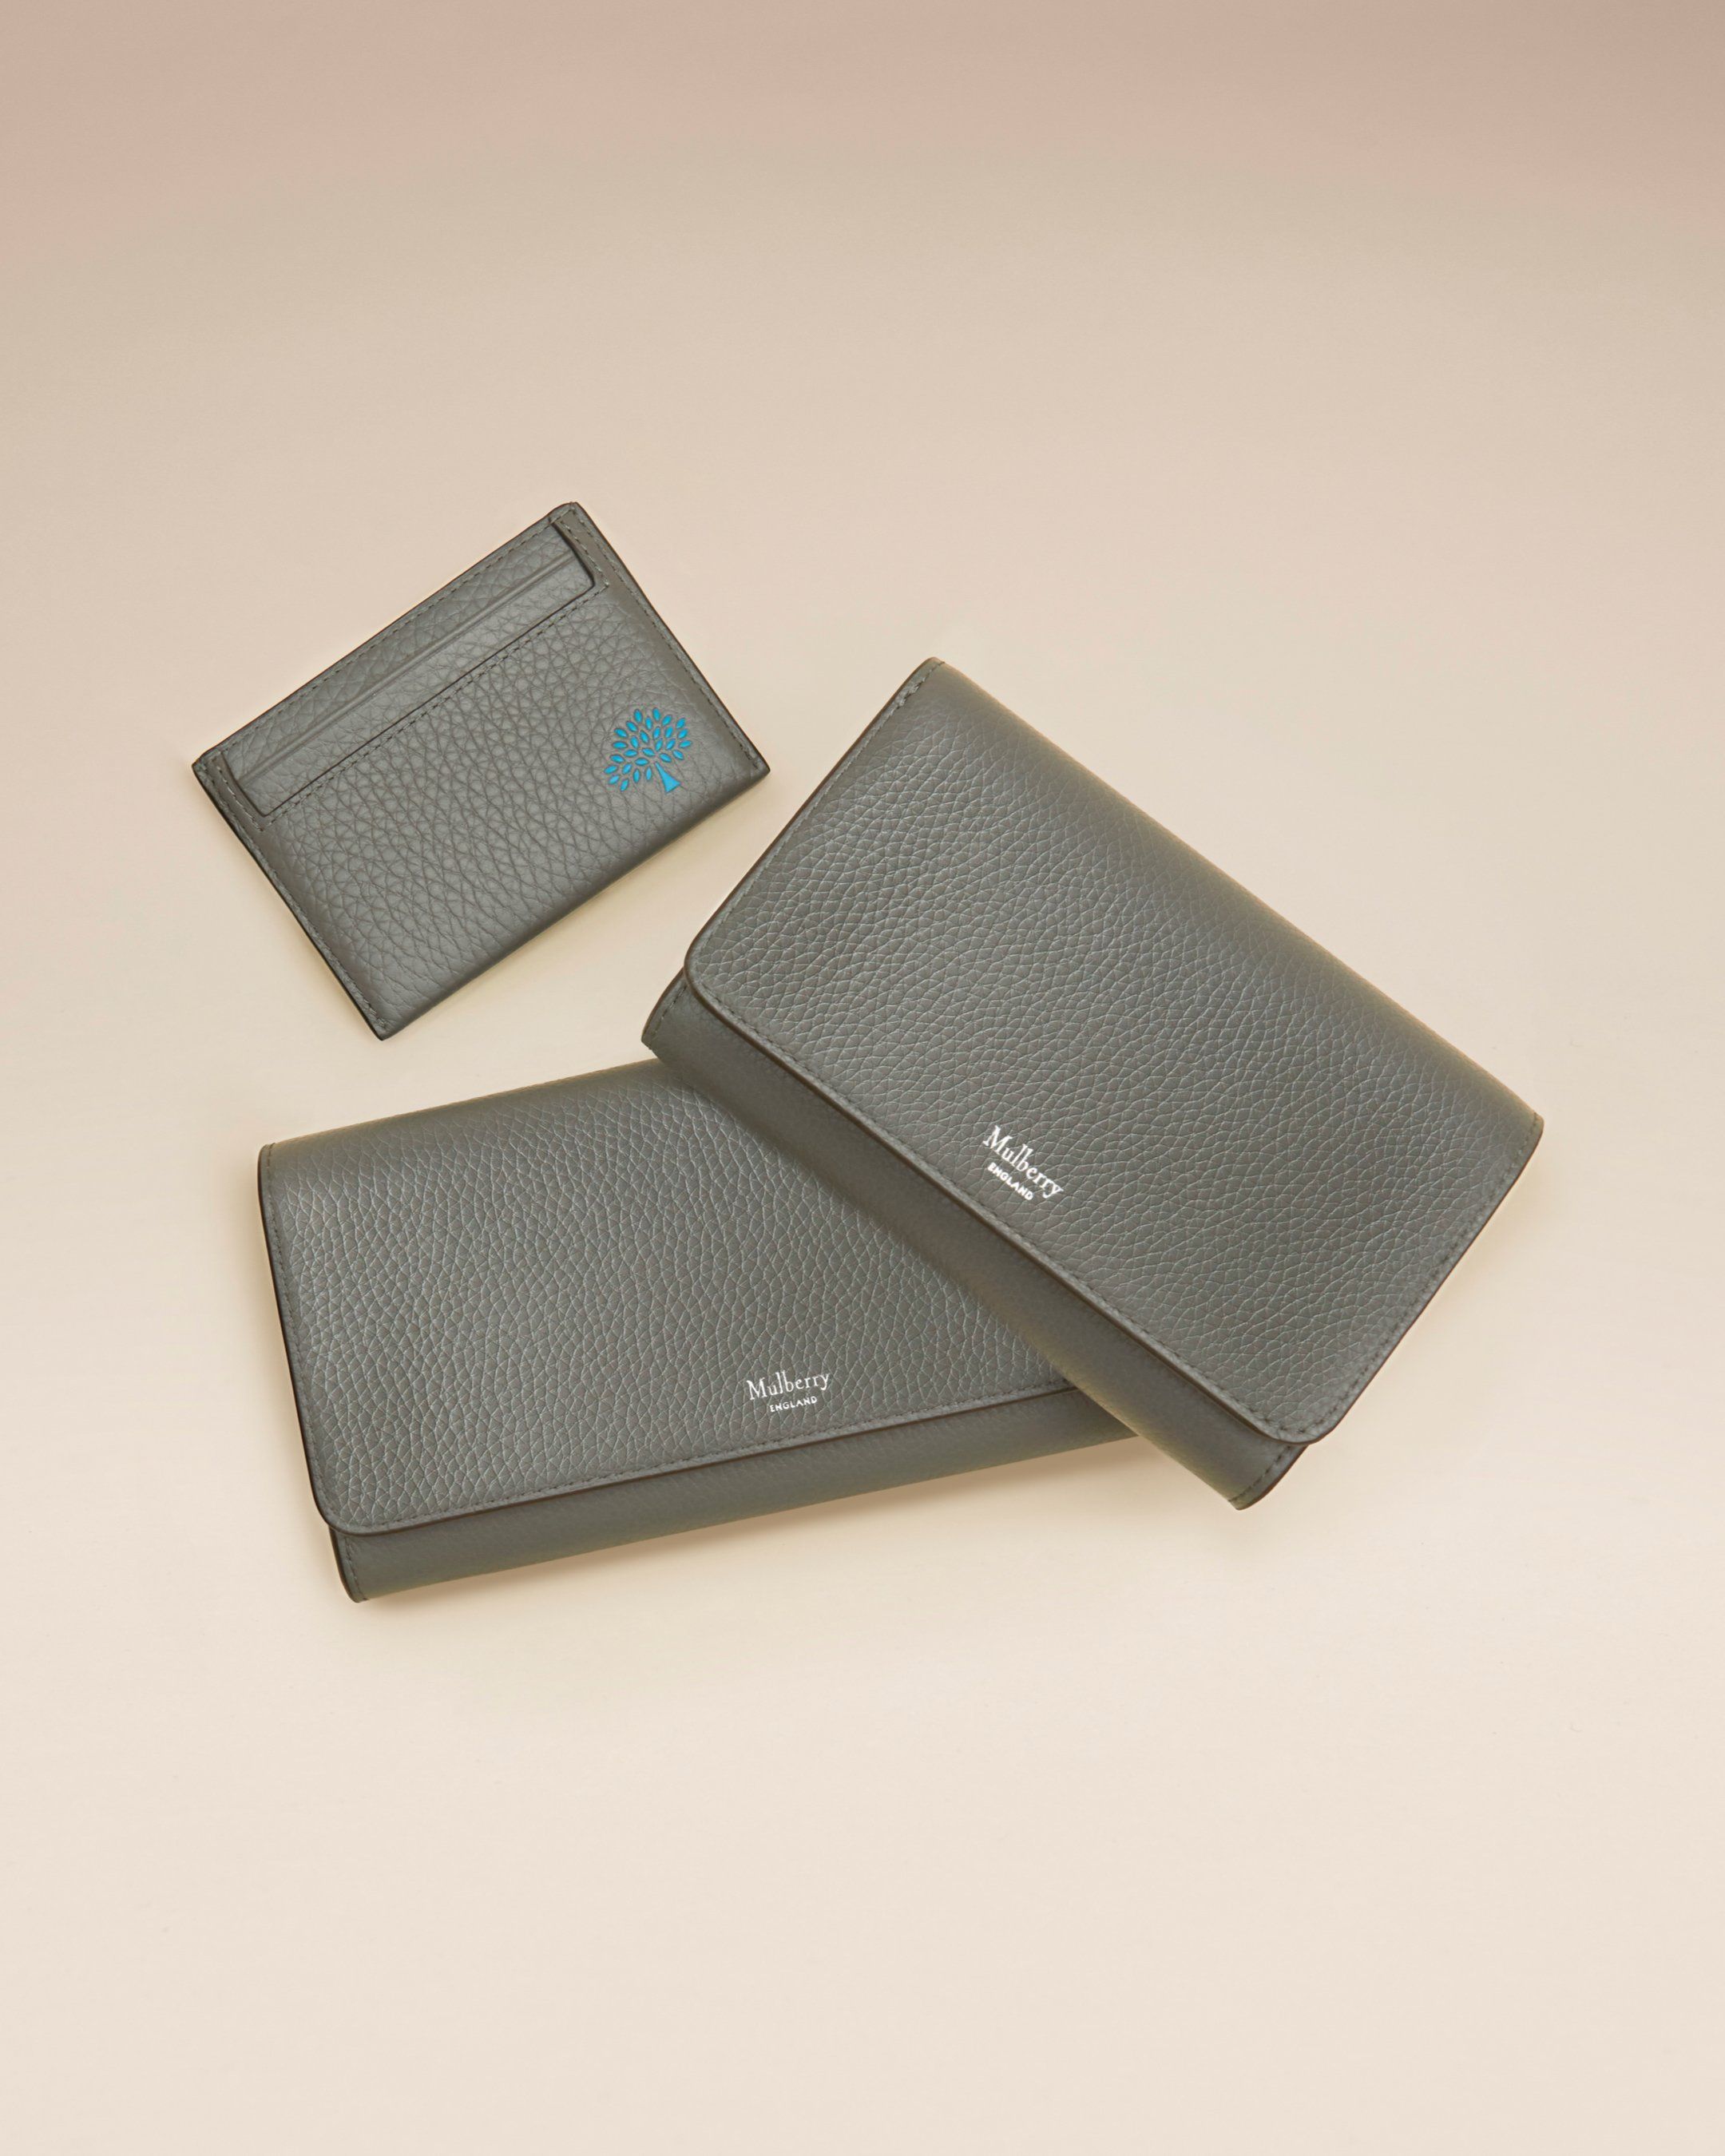 Three Mulberry wallets in grey leather